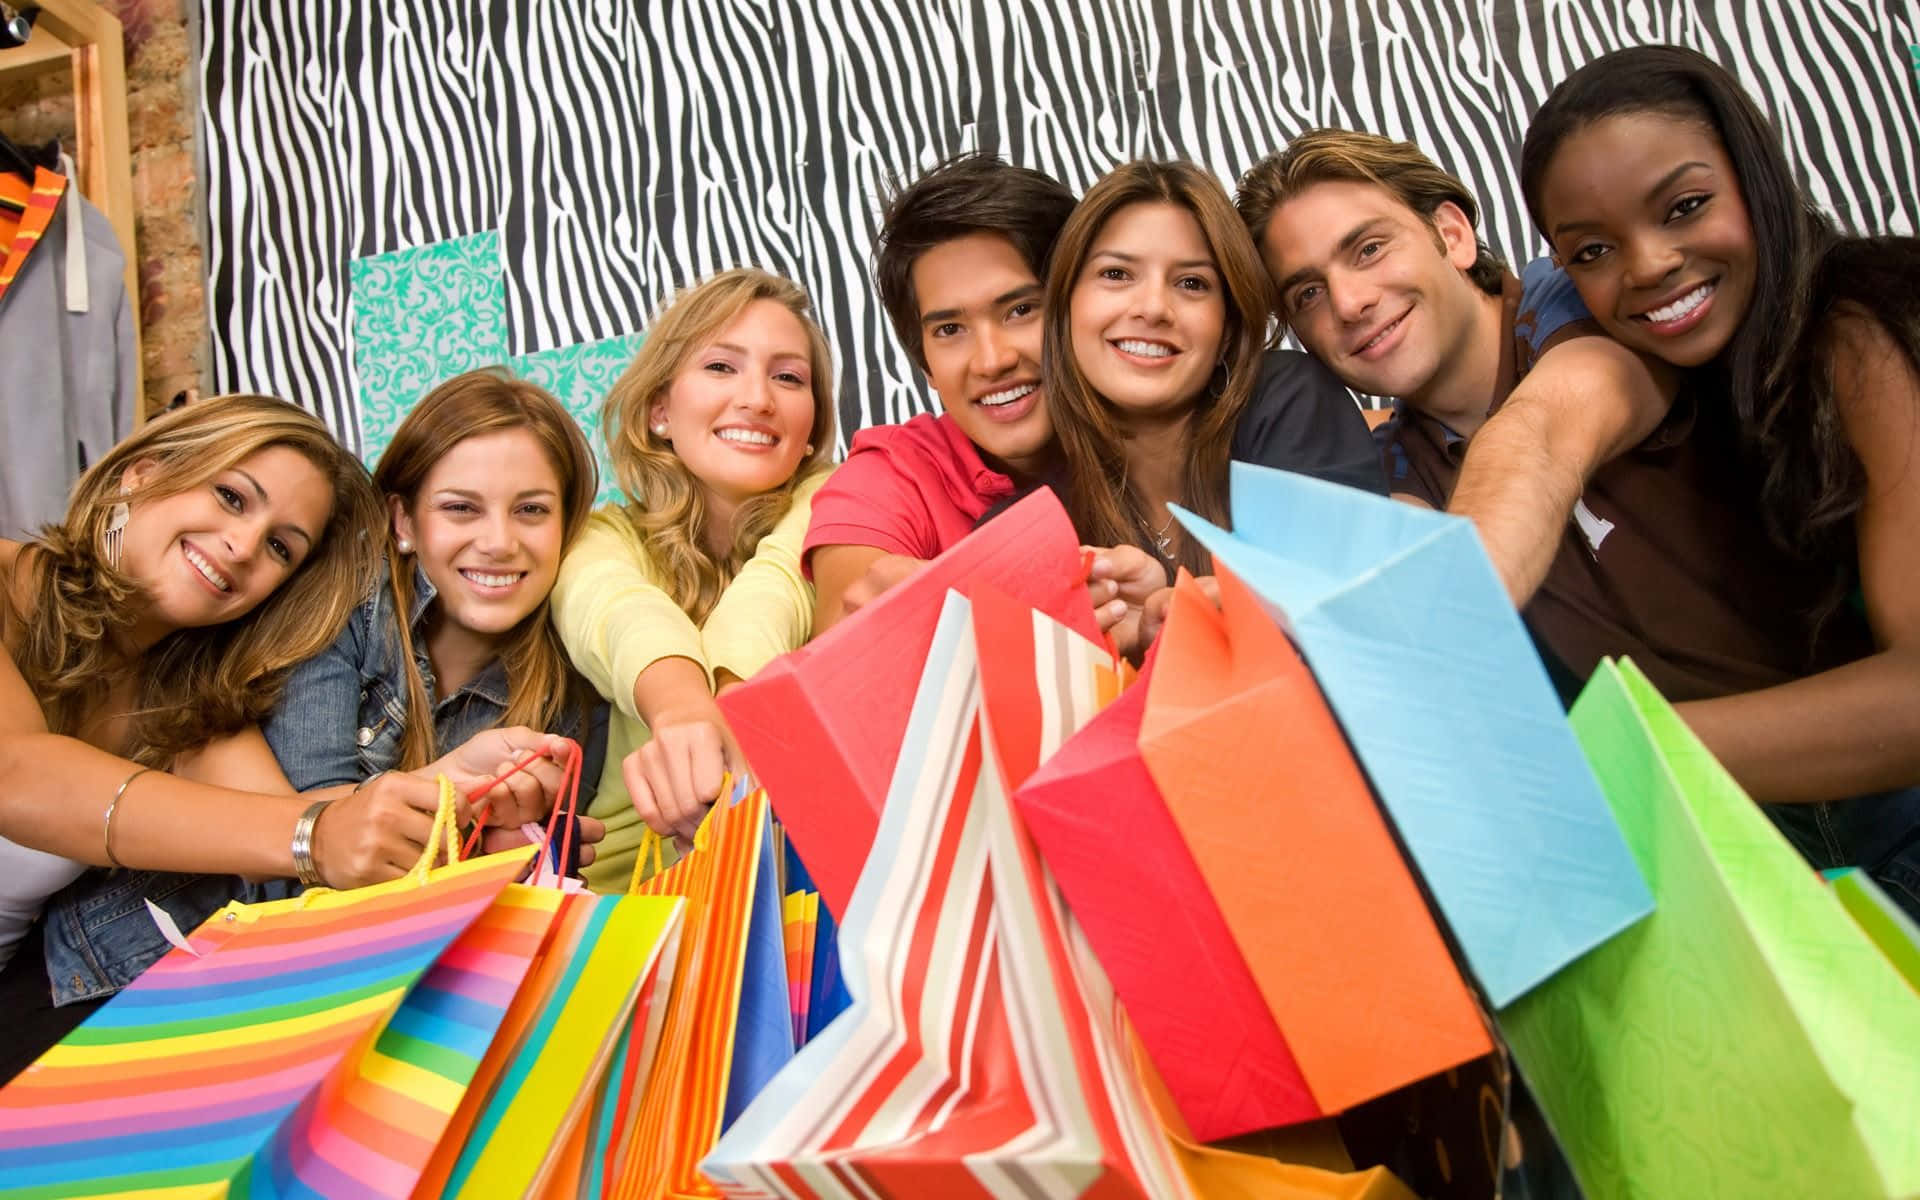 Download A Group Of People Holding Shopping Bags | Wallpapers.com